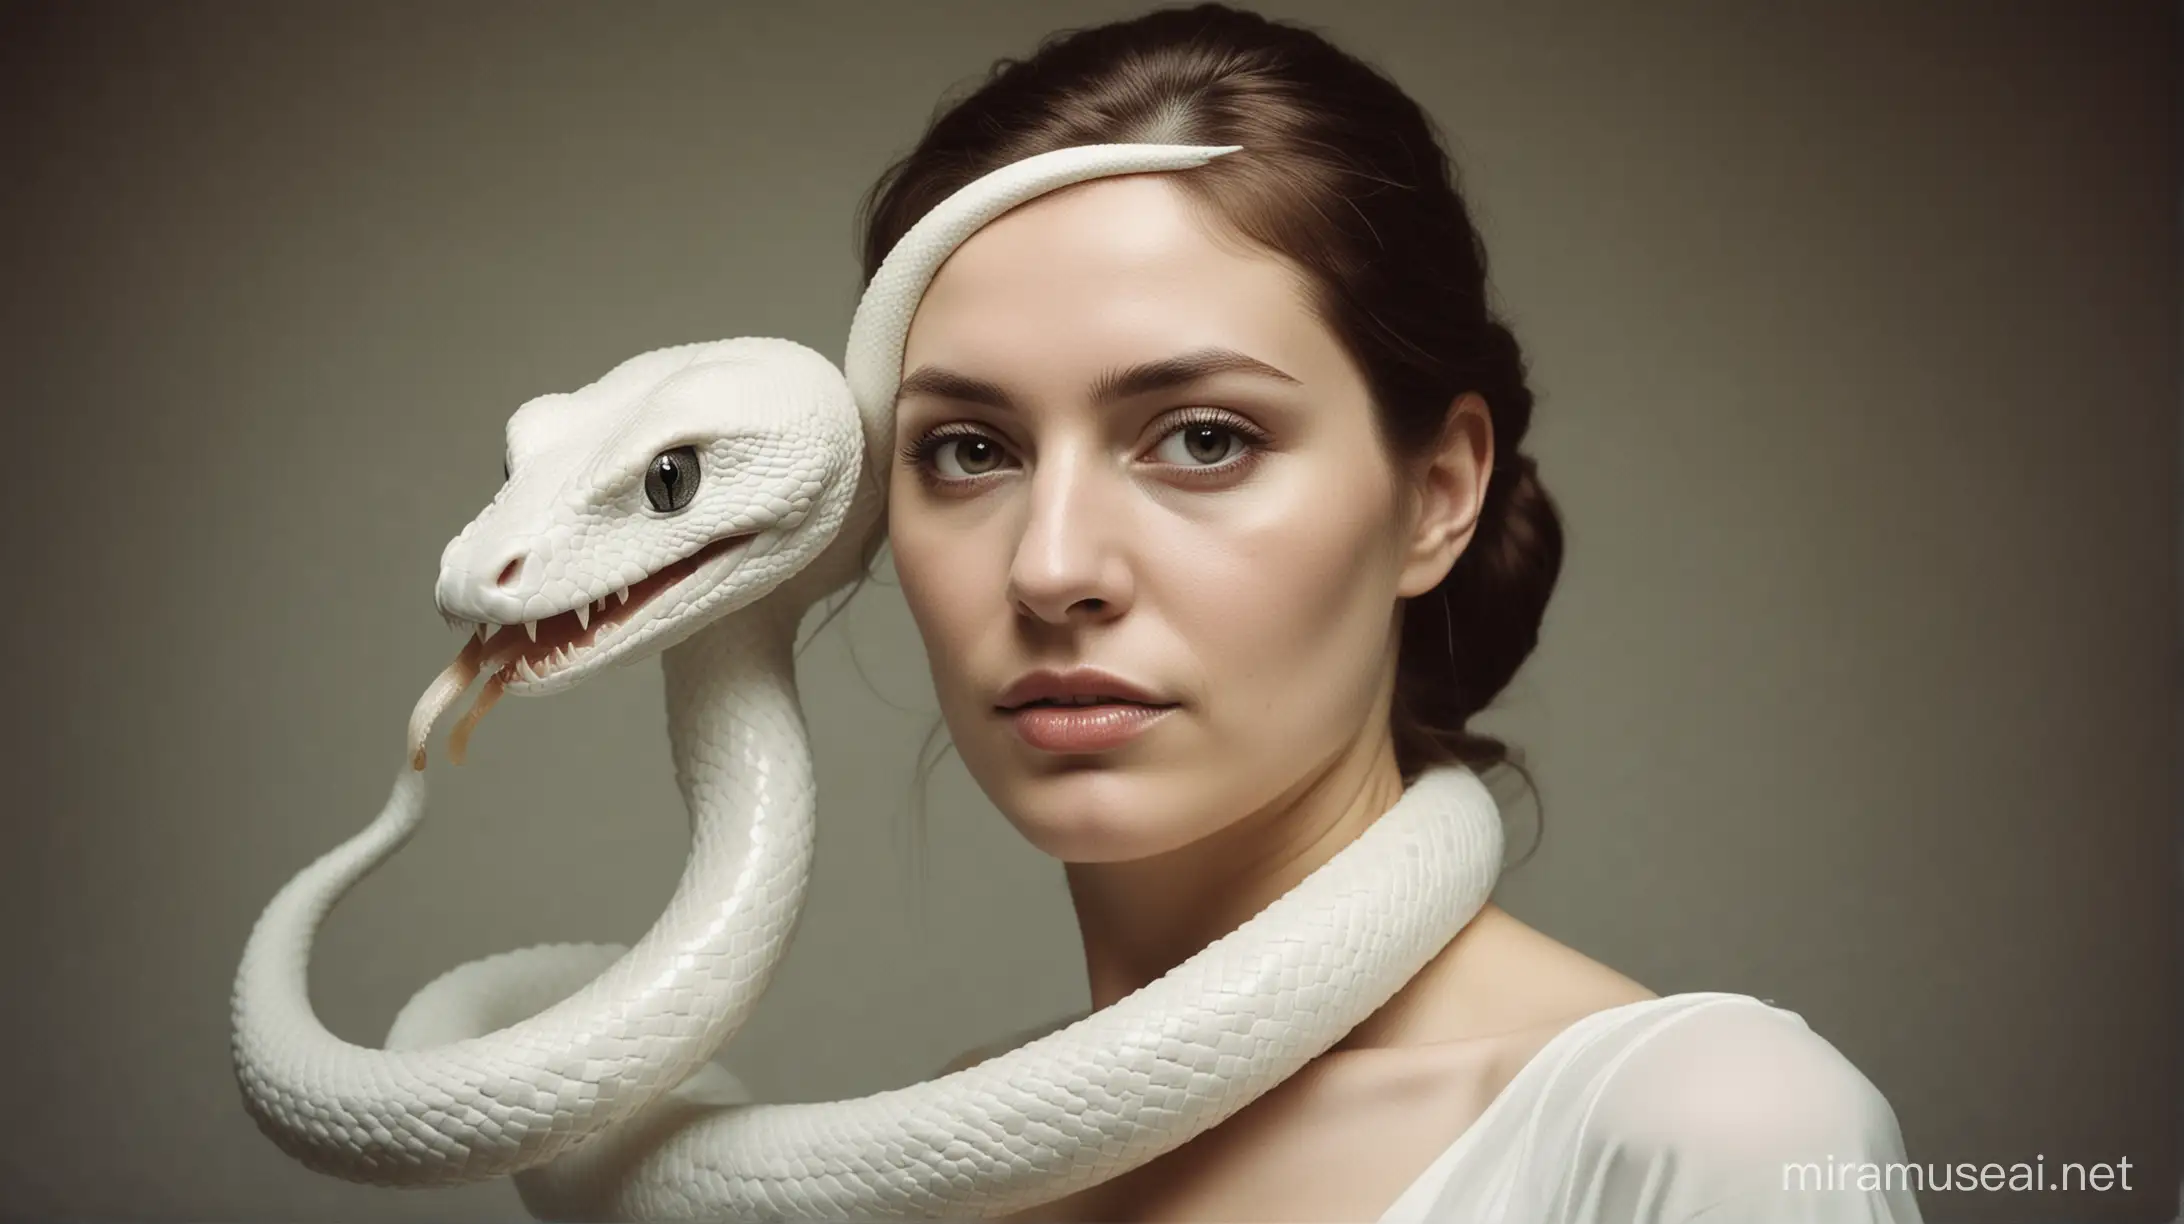 Ethereal Woman with White Snake Face Paint in Meticulous Photorealistic Still Life